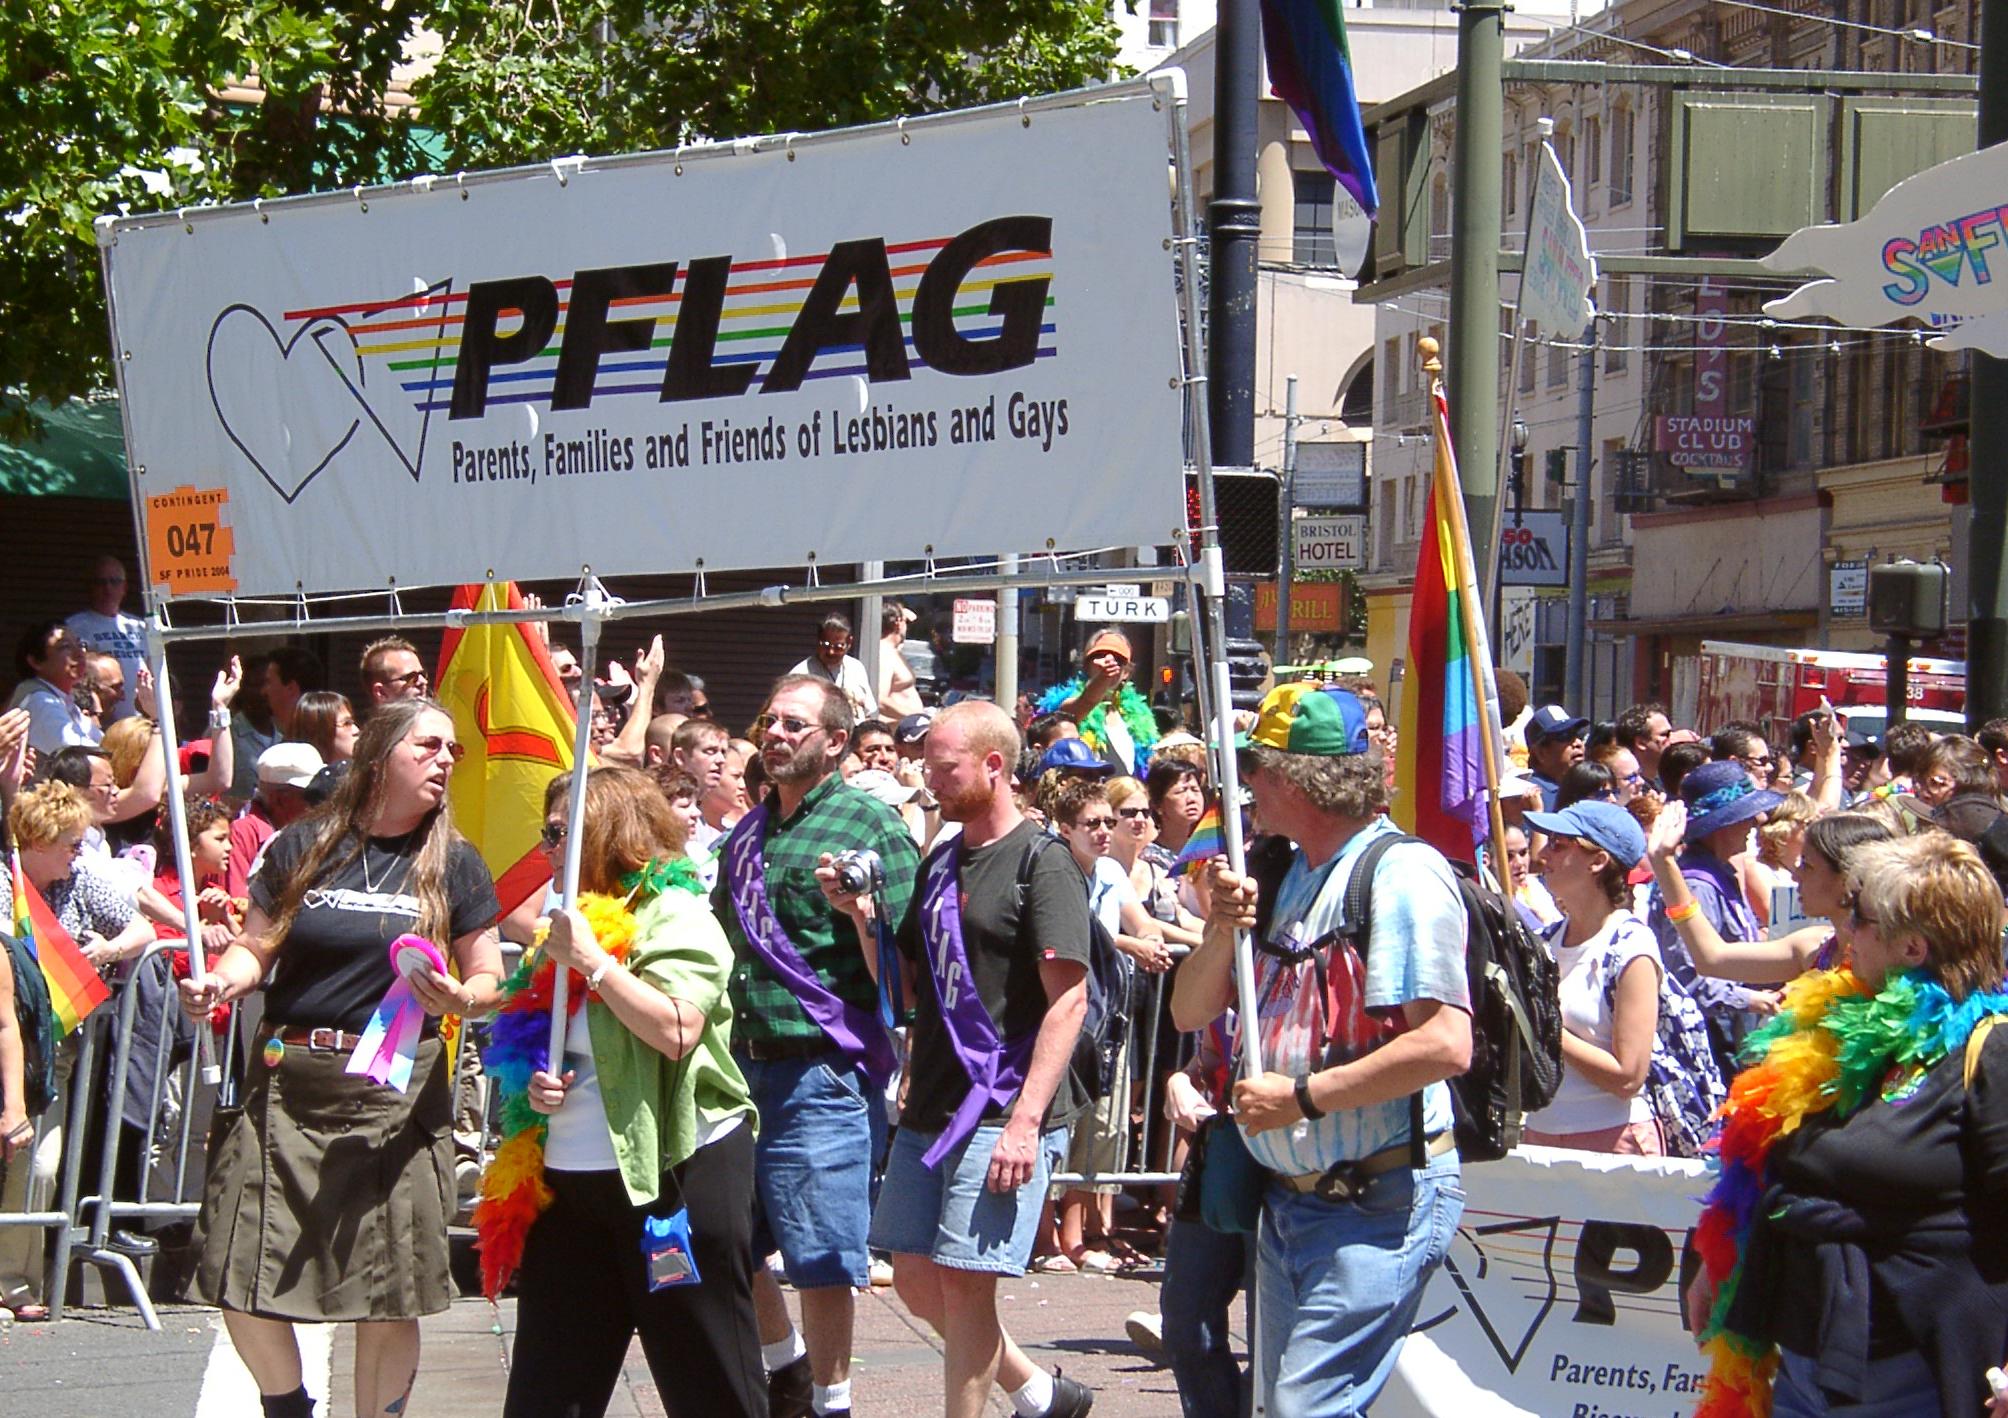 A crowd holds up a sign that says "PFLAG Parents, Families and Friends of Lesbians and Gays."